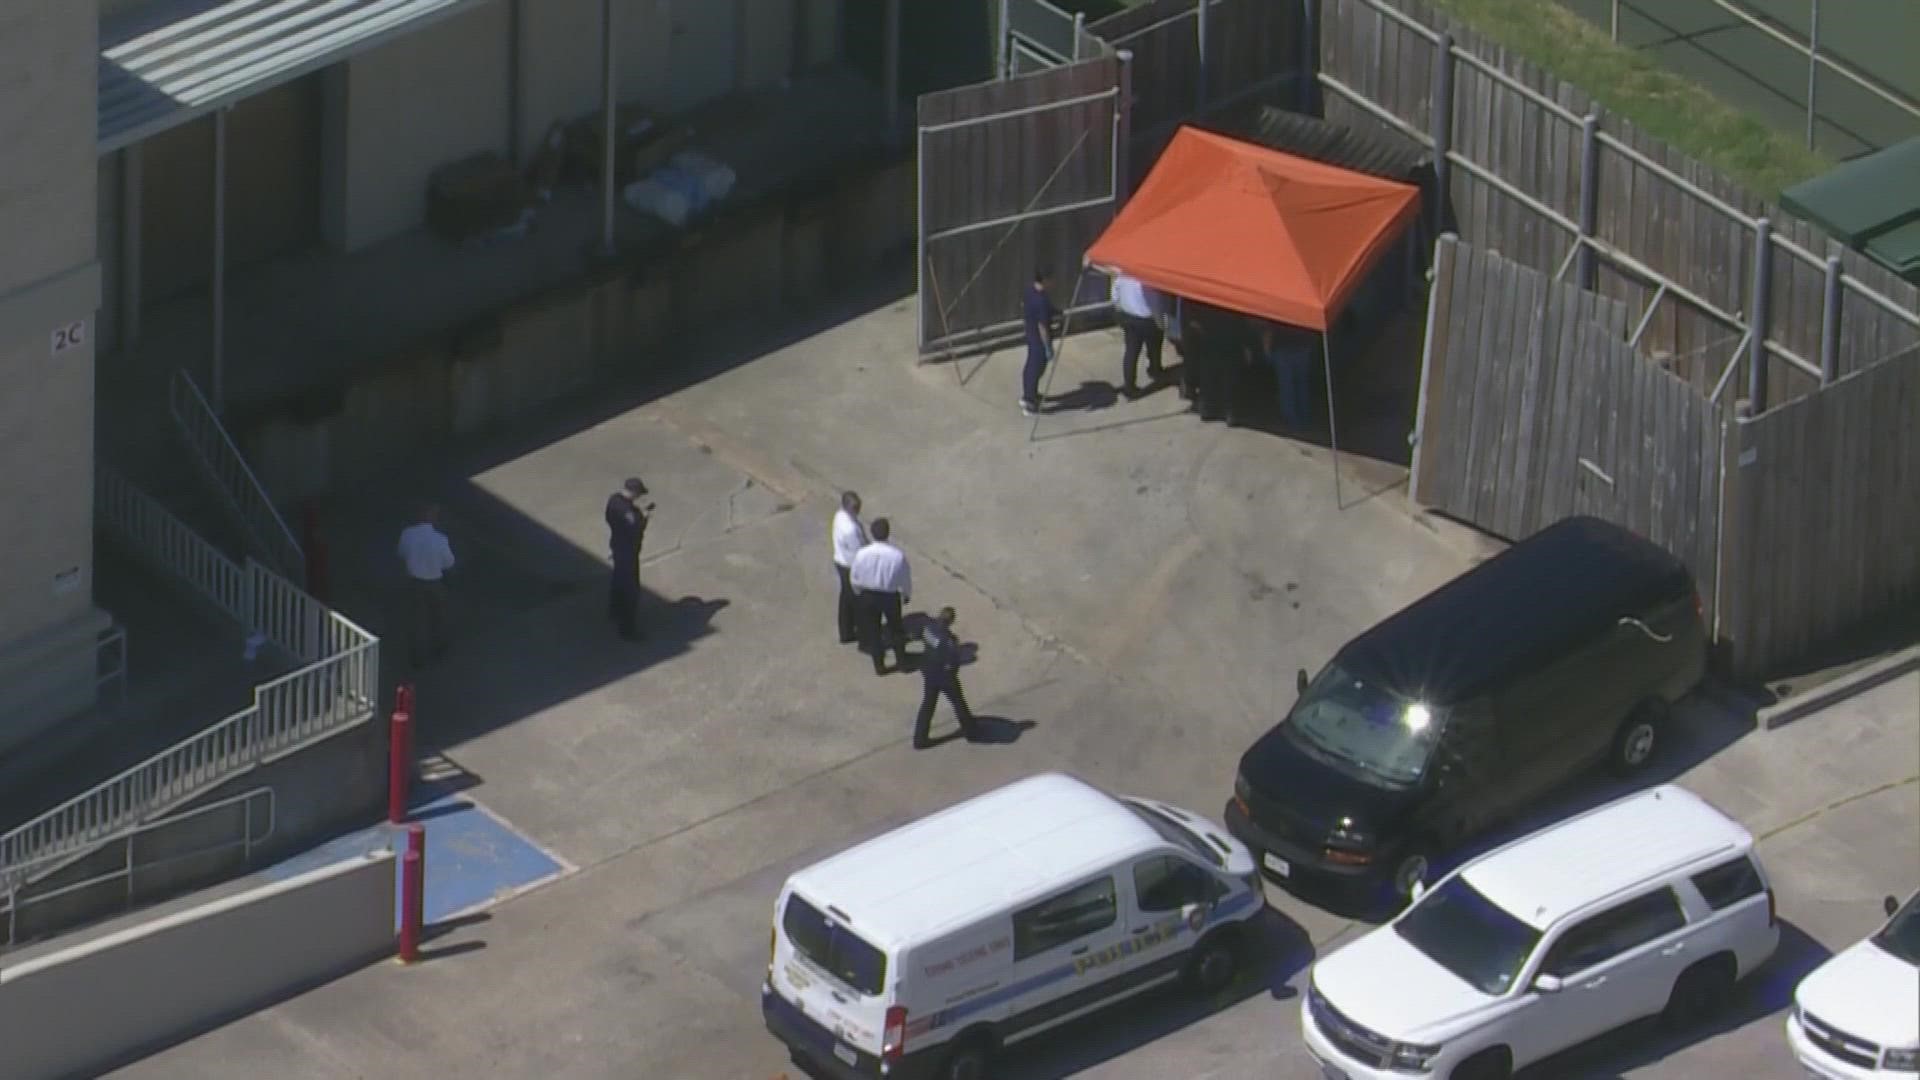 The body was found in a dumpster outside Austin Middle School Thursday.